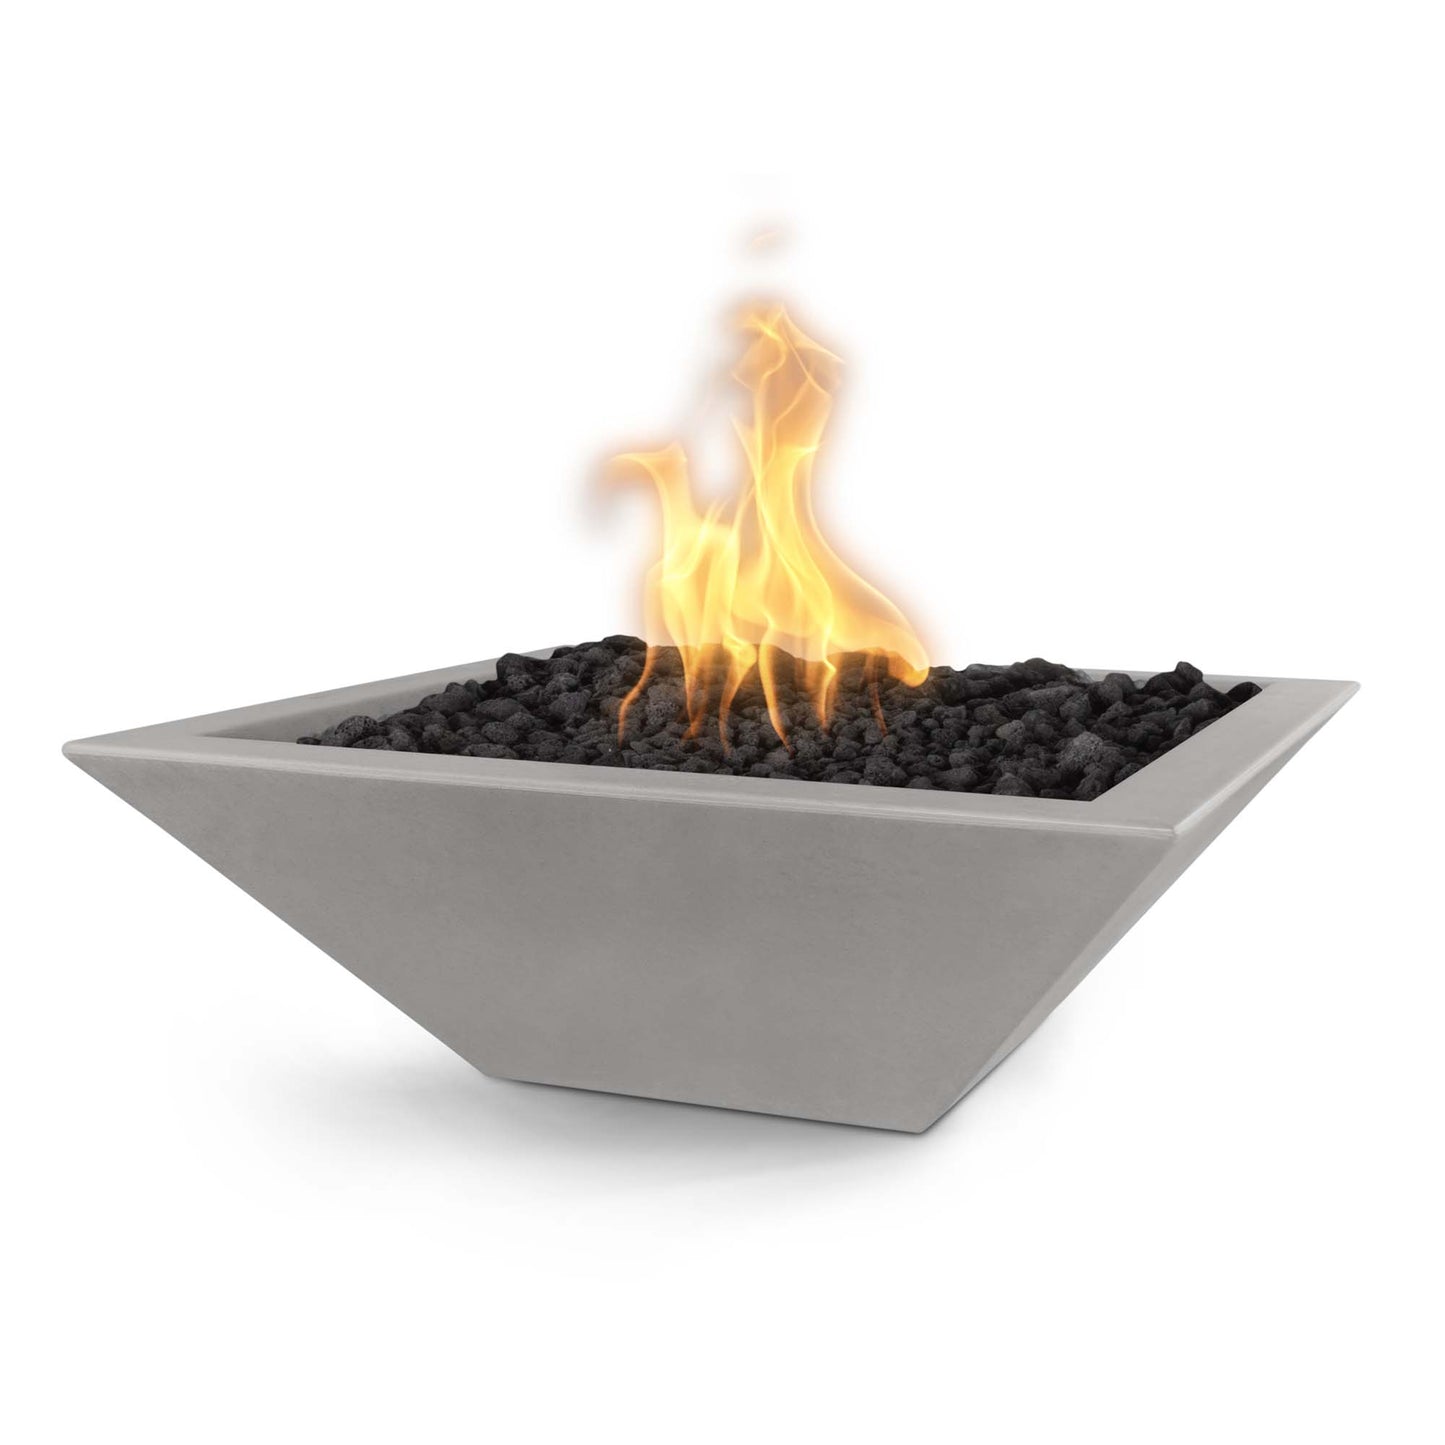 The Outdoor Plus Square Maya 30" Metallic Copper GFRC Concrete Liquid Propane Fire Bowl with Match Lit with Flame Sense Ignition